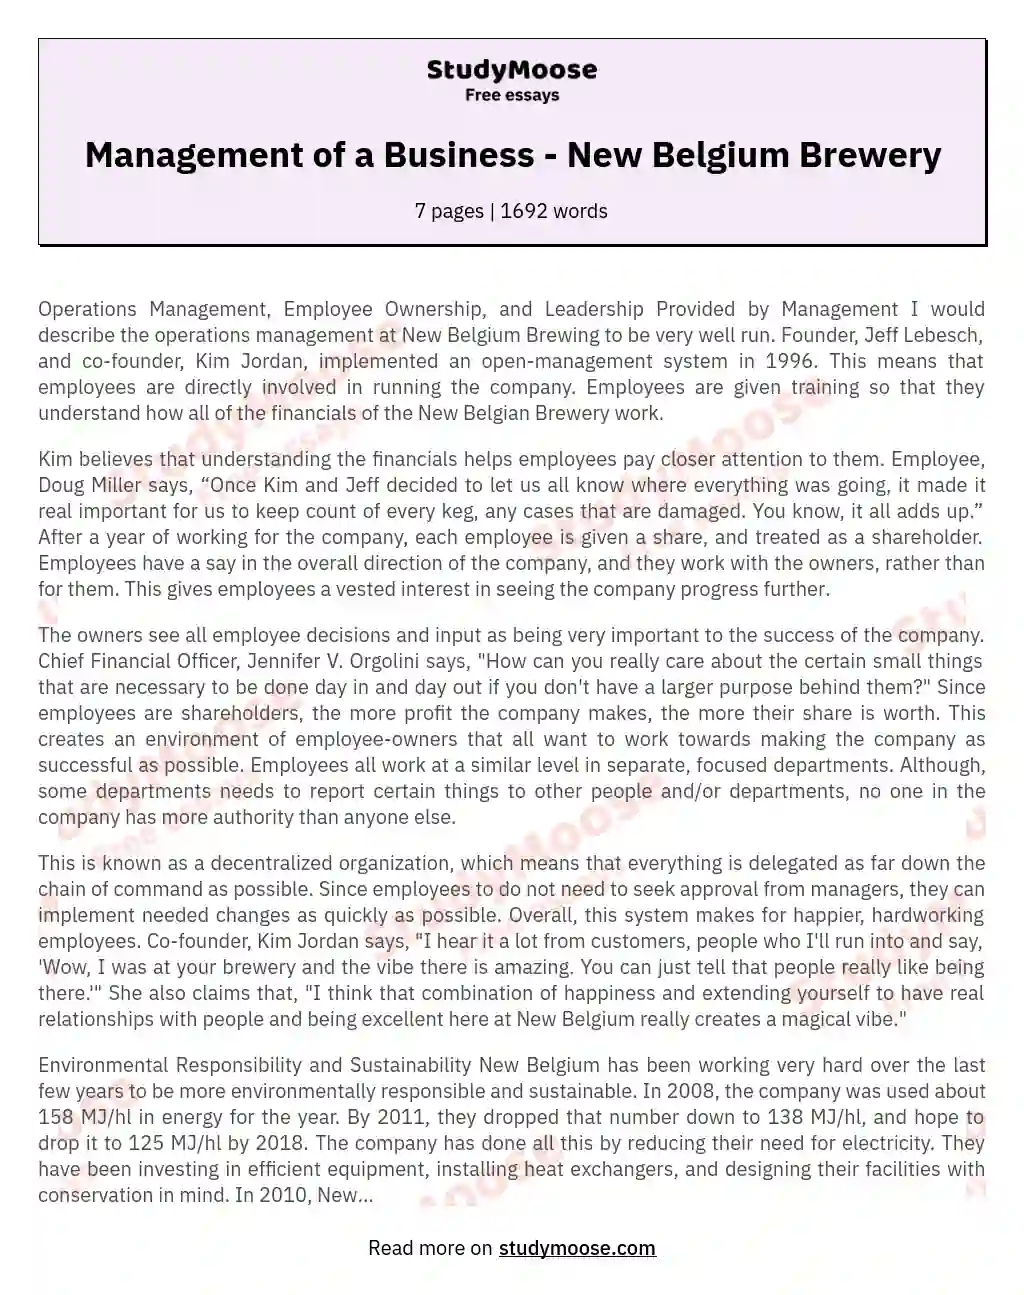 Management of a Business - New Belgium Brewery